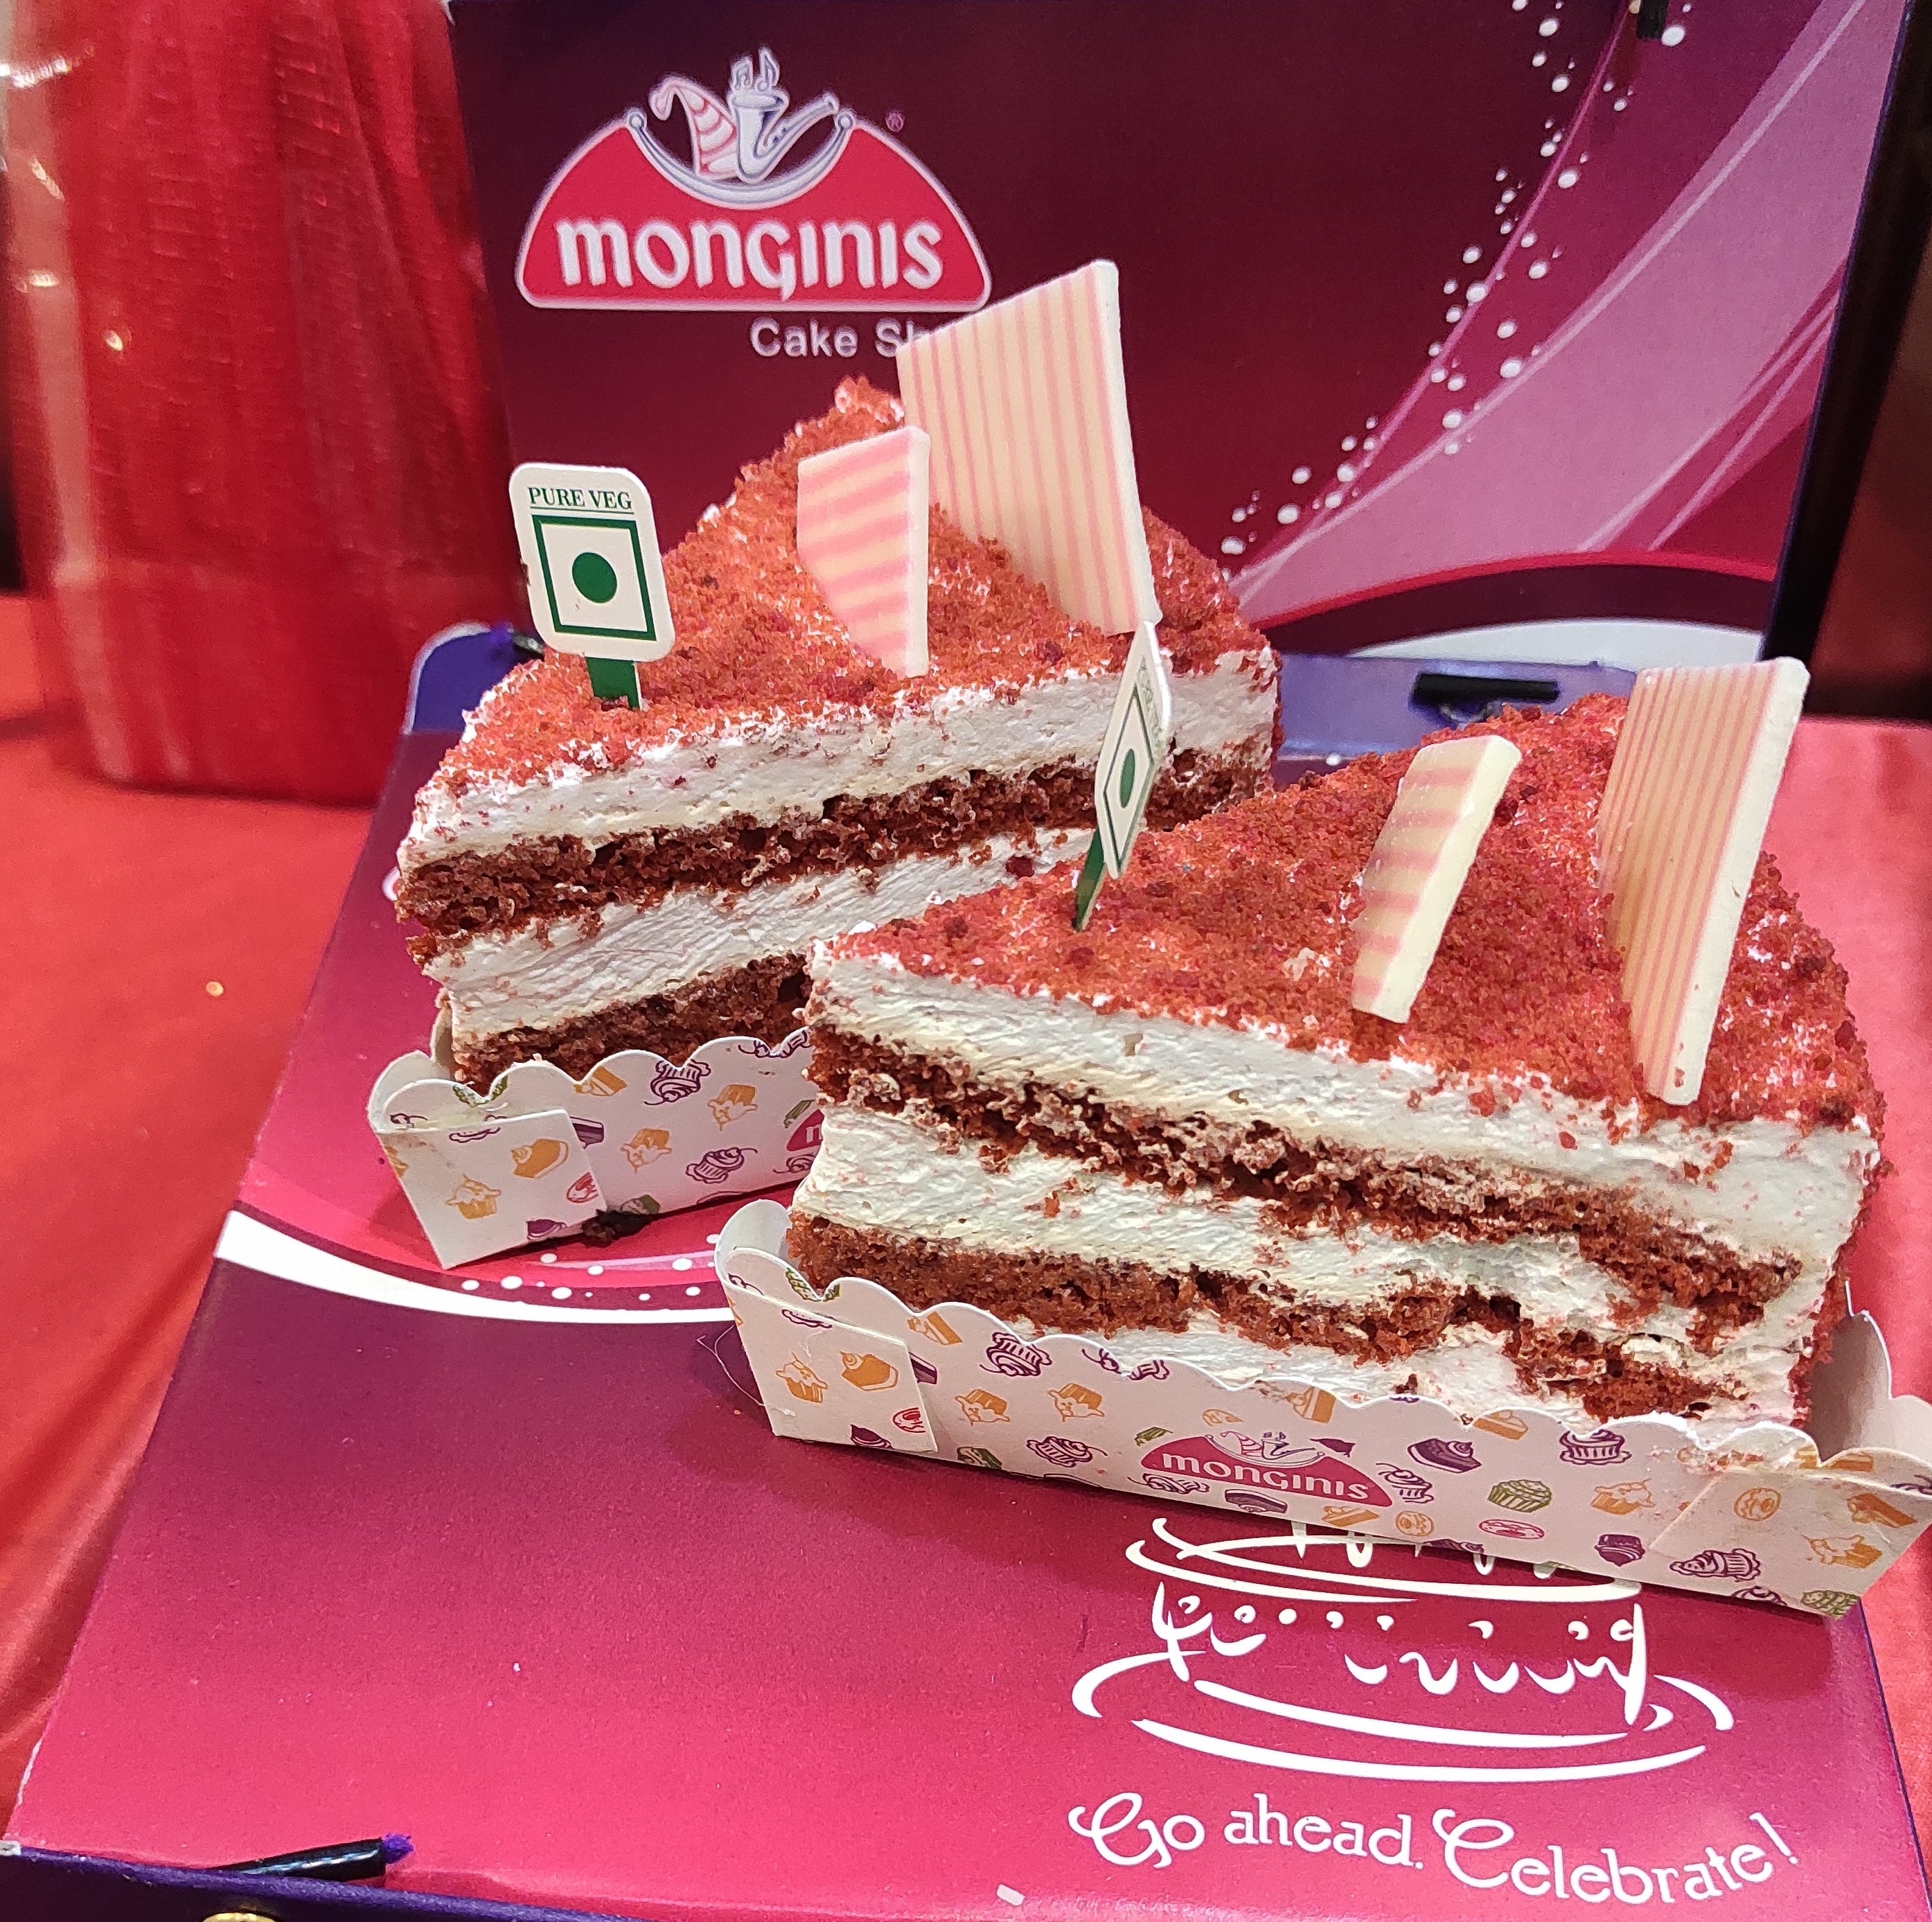 Buy Monginis The Cake Shop Fresh Cake - Butterscotch Online at Best Price  of Rs null - bigbasket